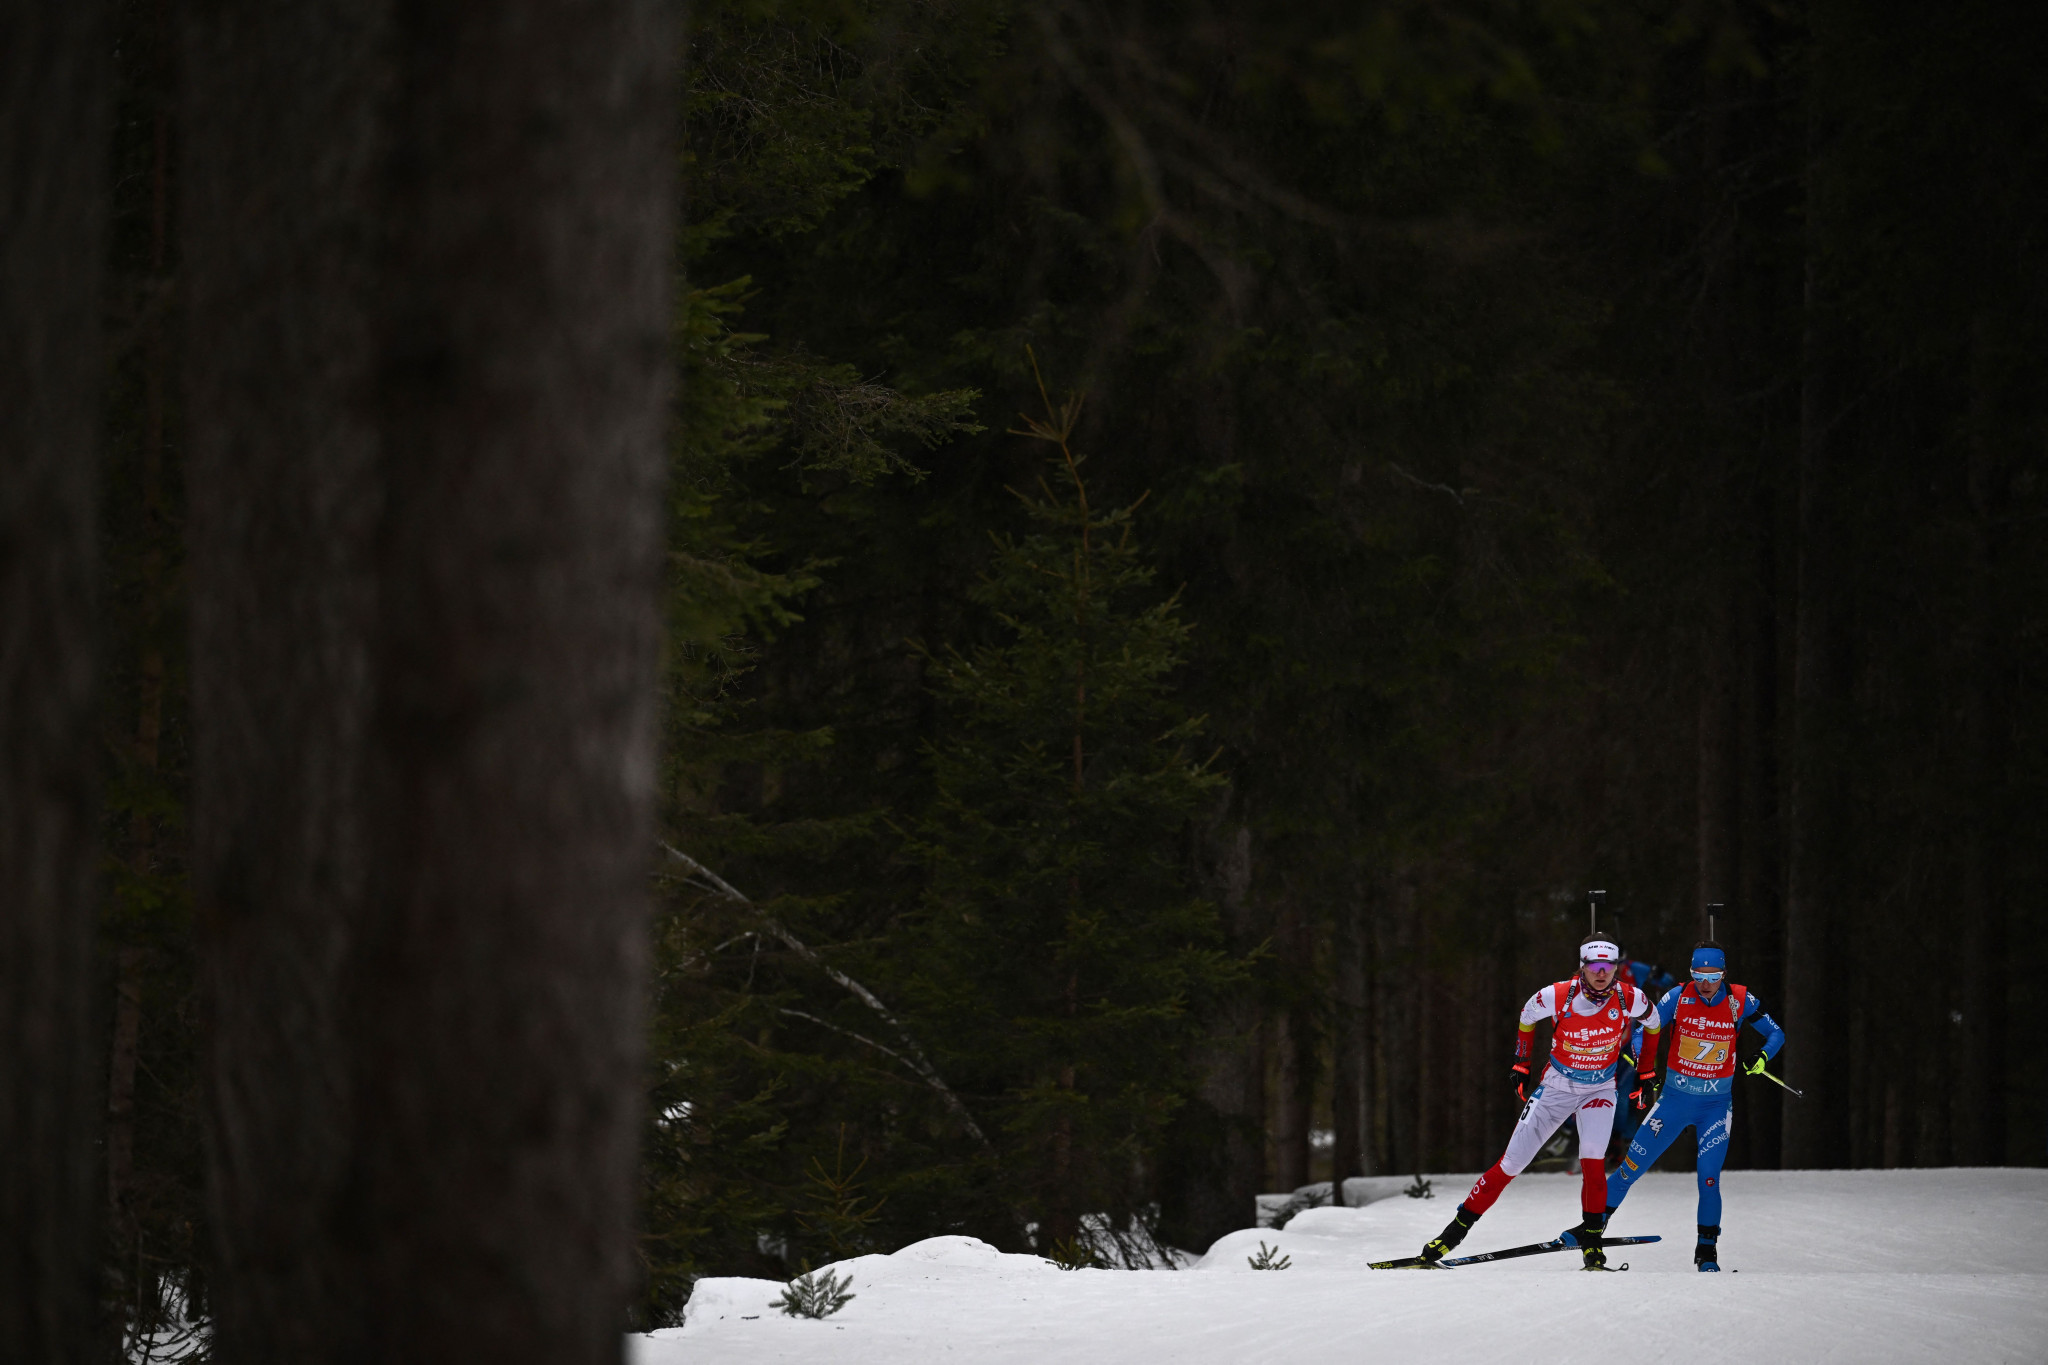 IBU announces planned Tuesday start to season in bid to reduce clashes with FIFA World Cup